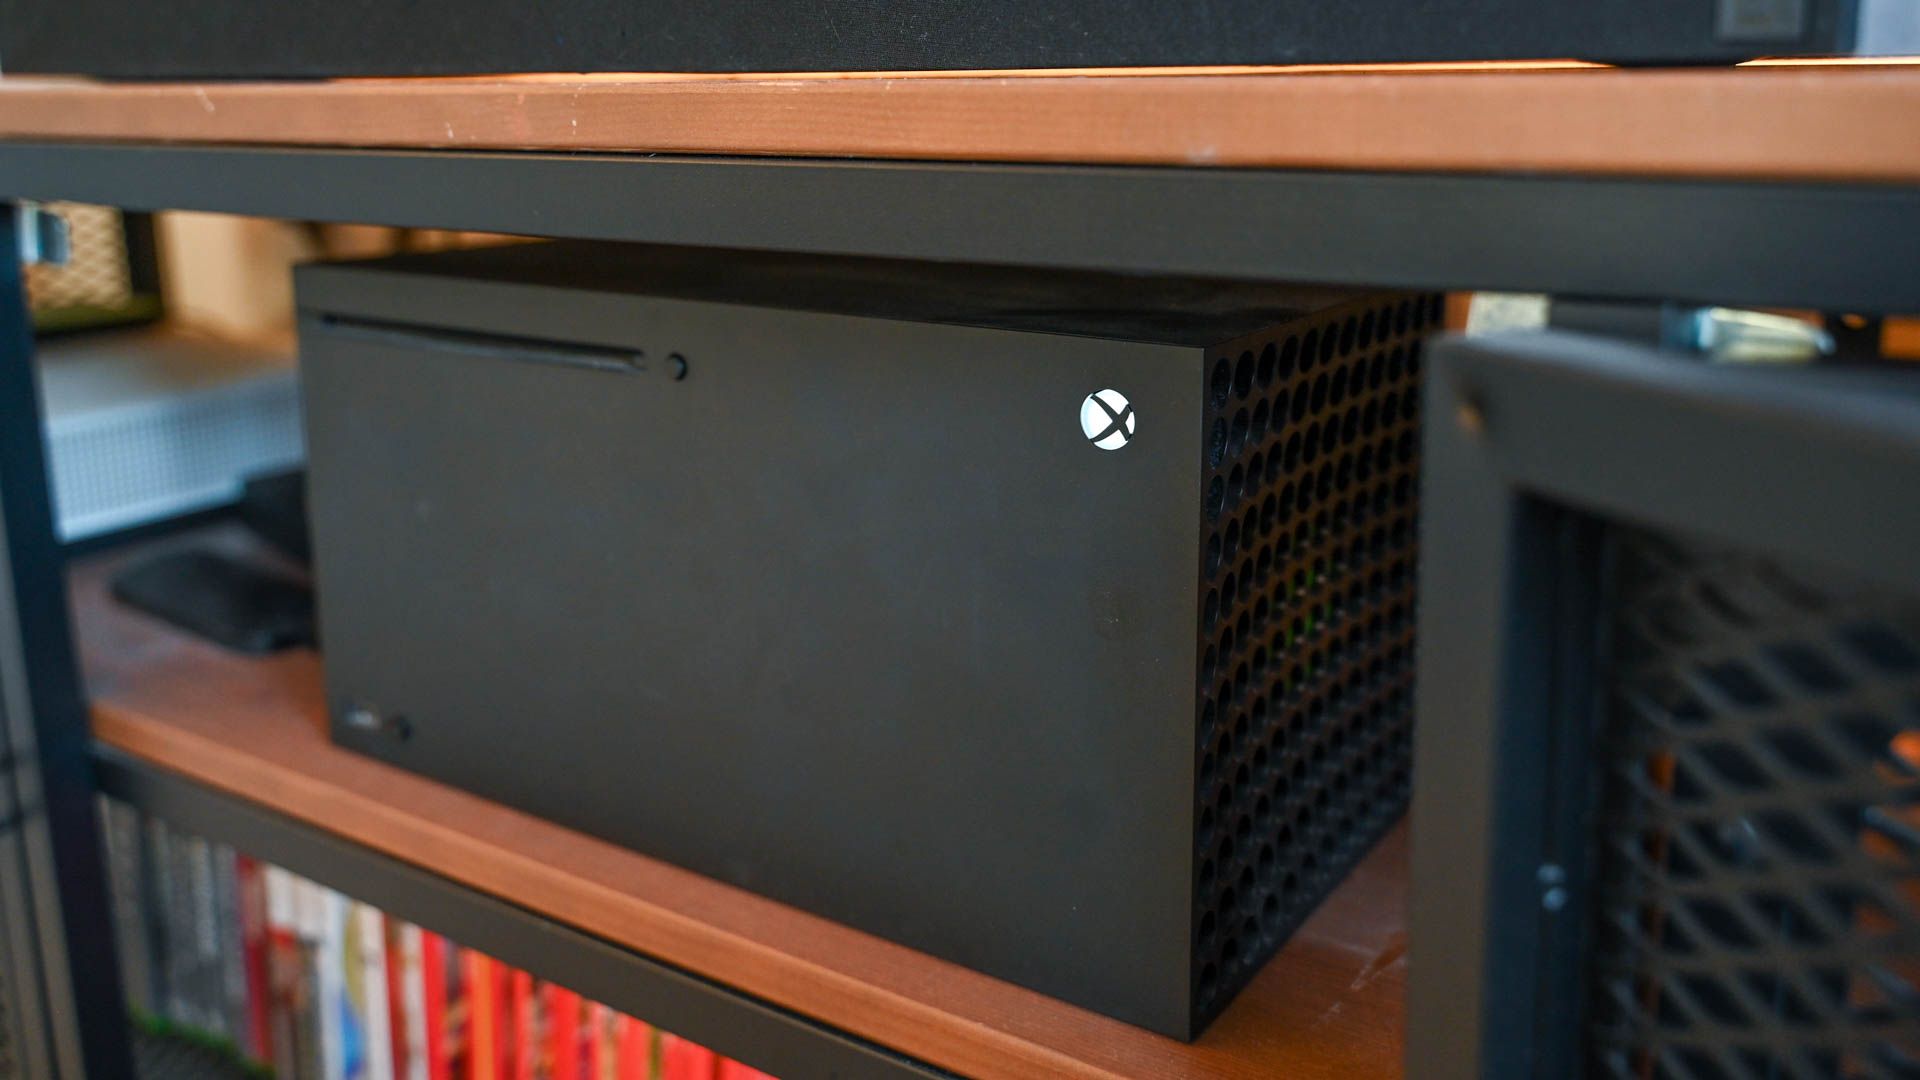 Xbox Series X console in an entertainment unit.